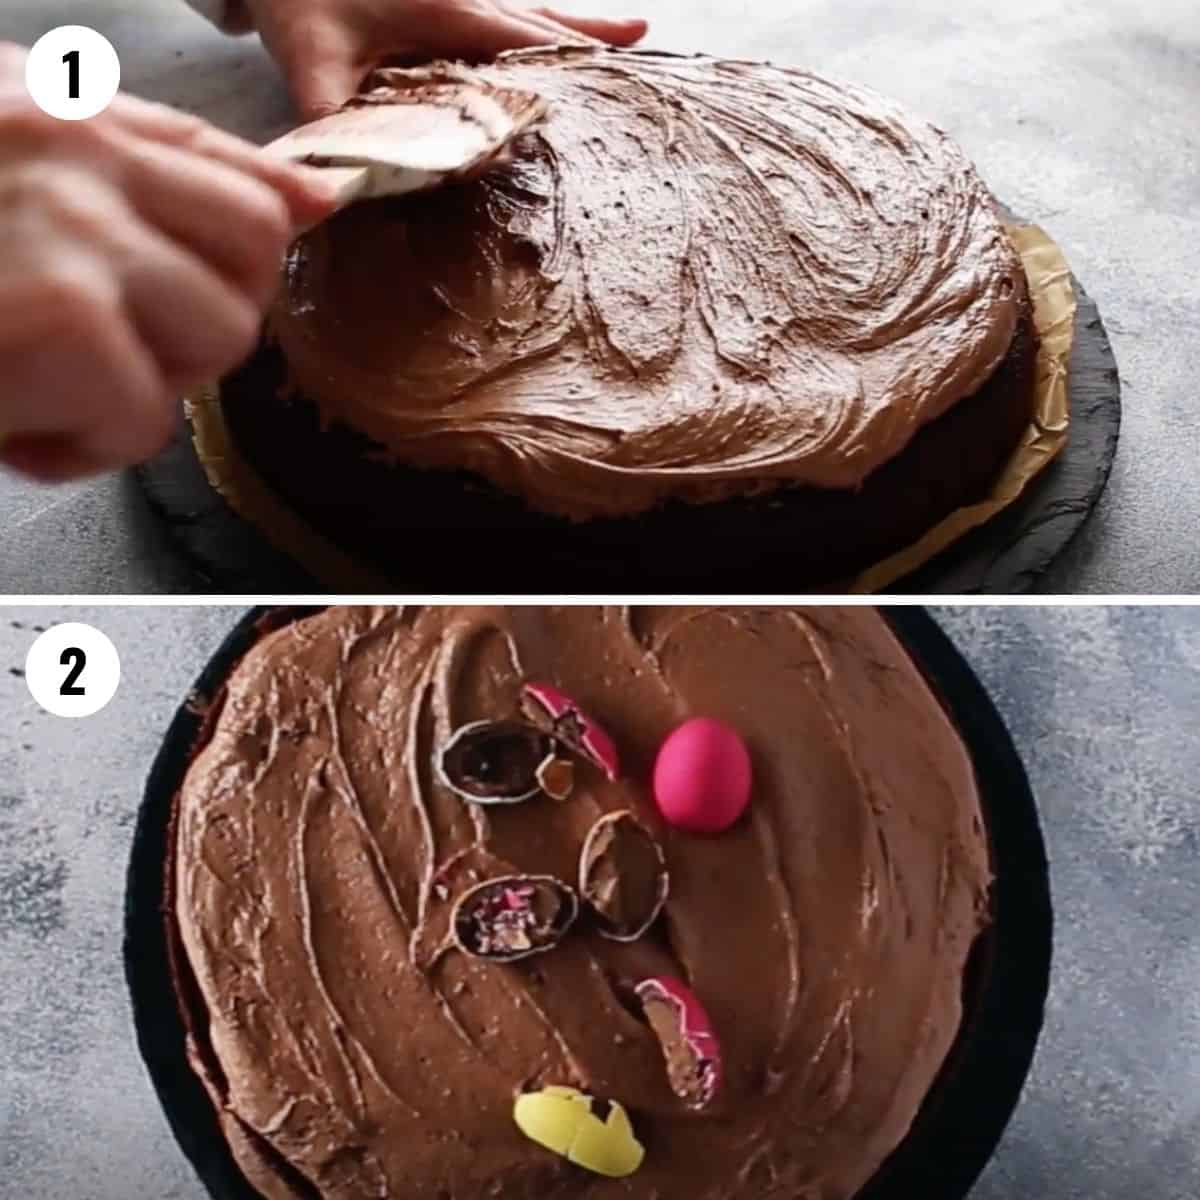 A collage spreading the chocolate frosting over the chocolate cake and then adding the chocolate Easter eggs.